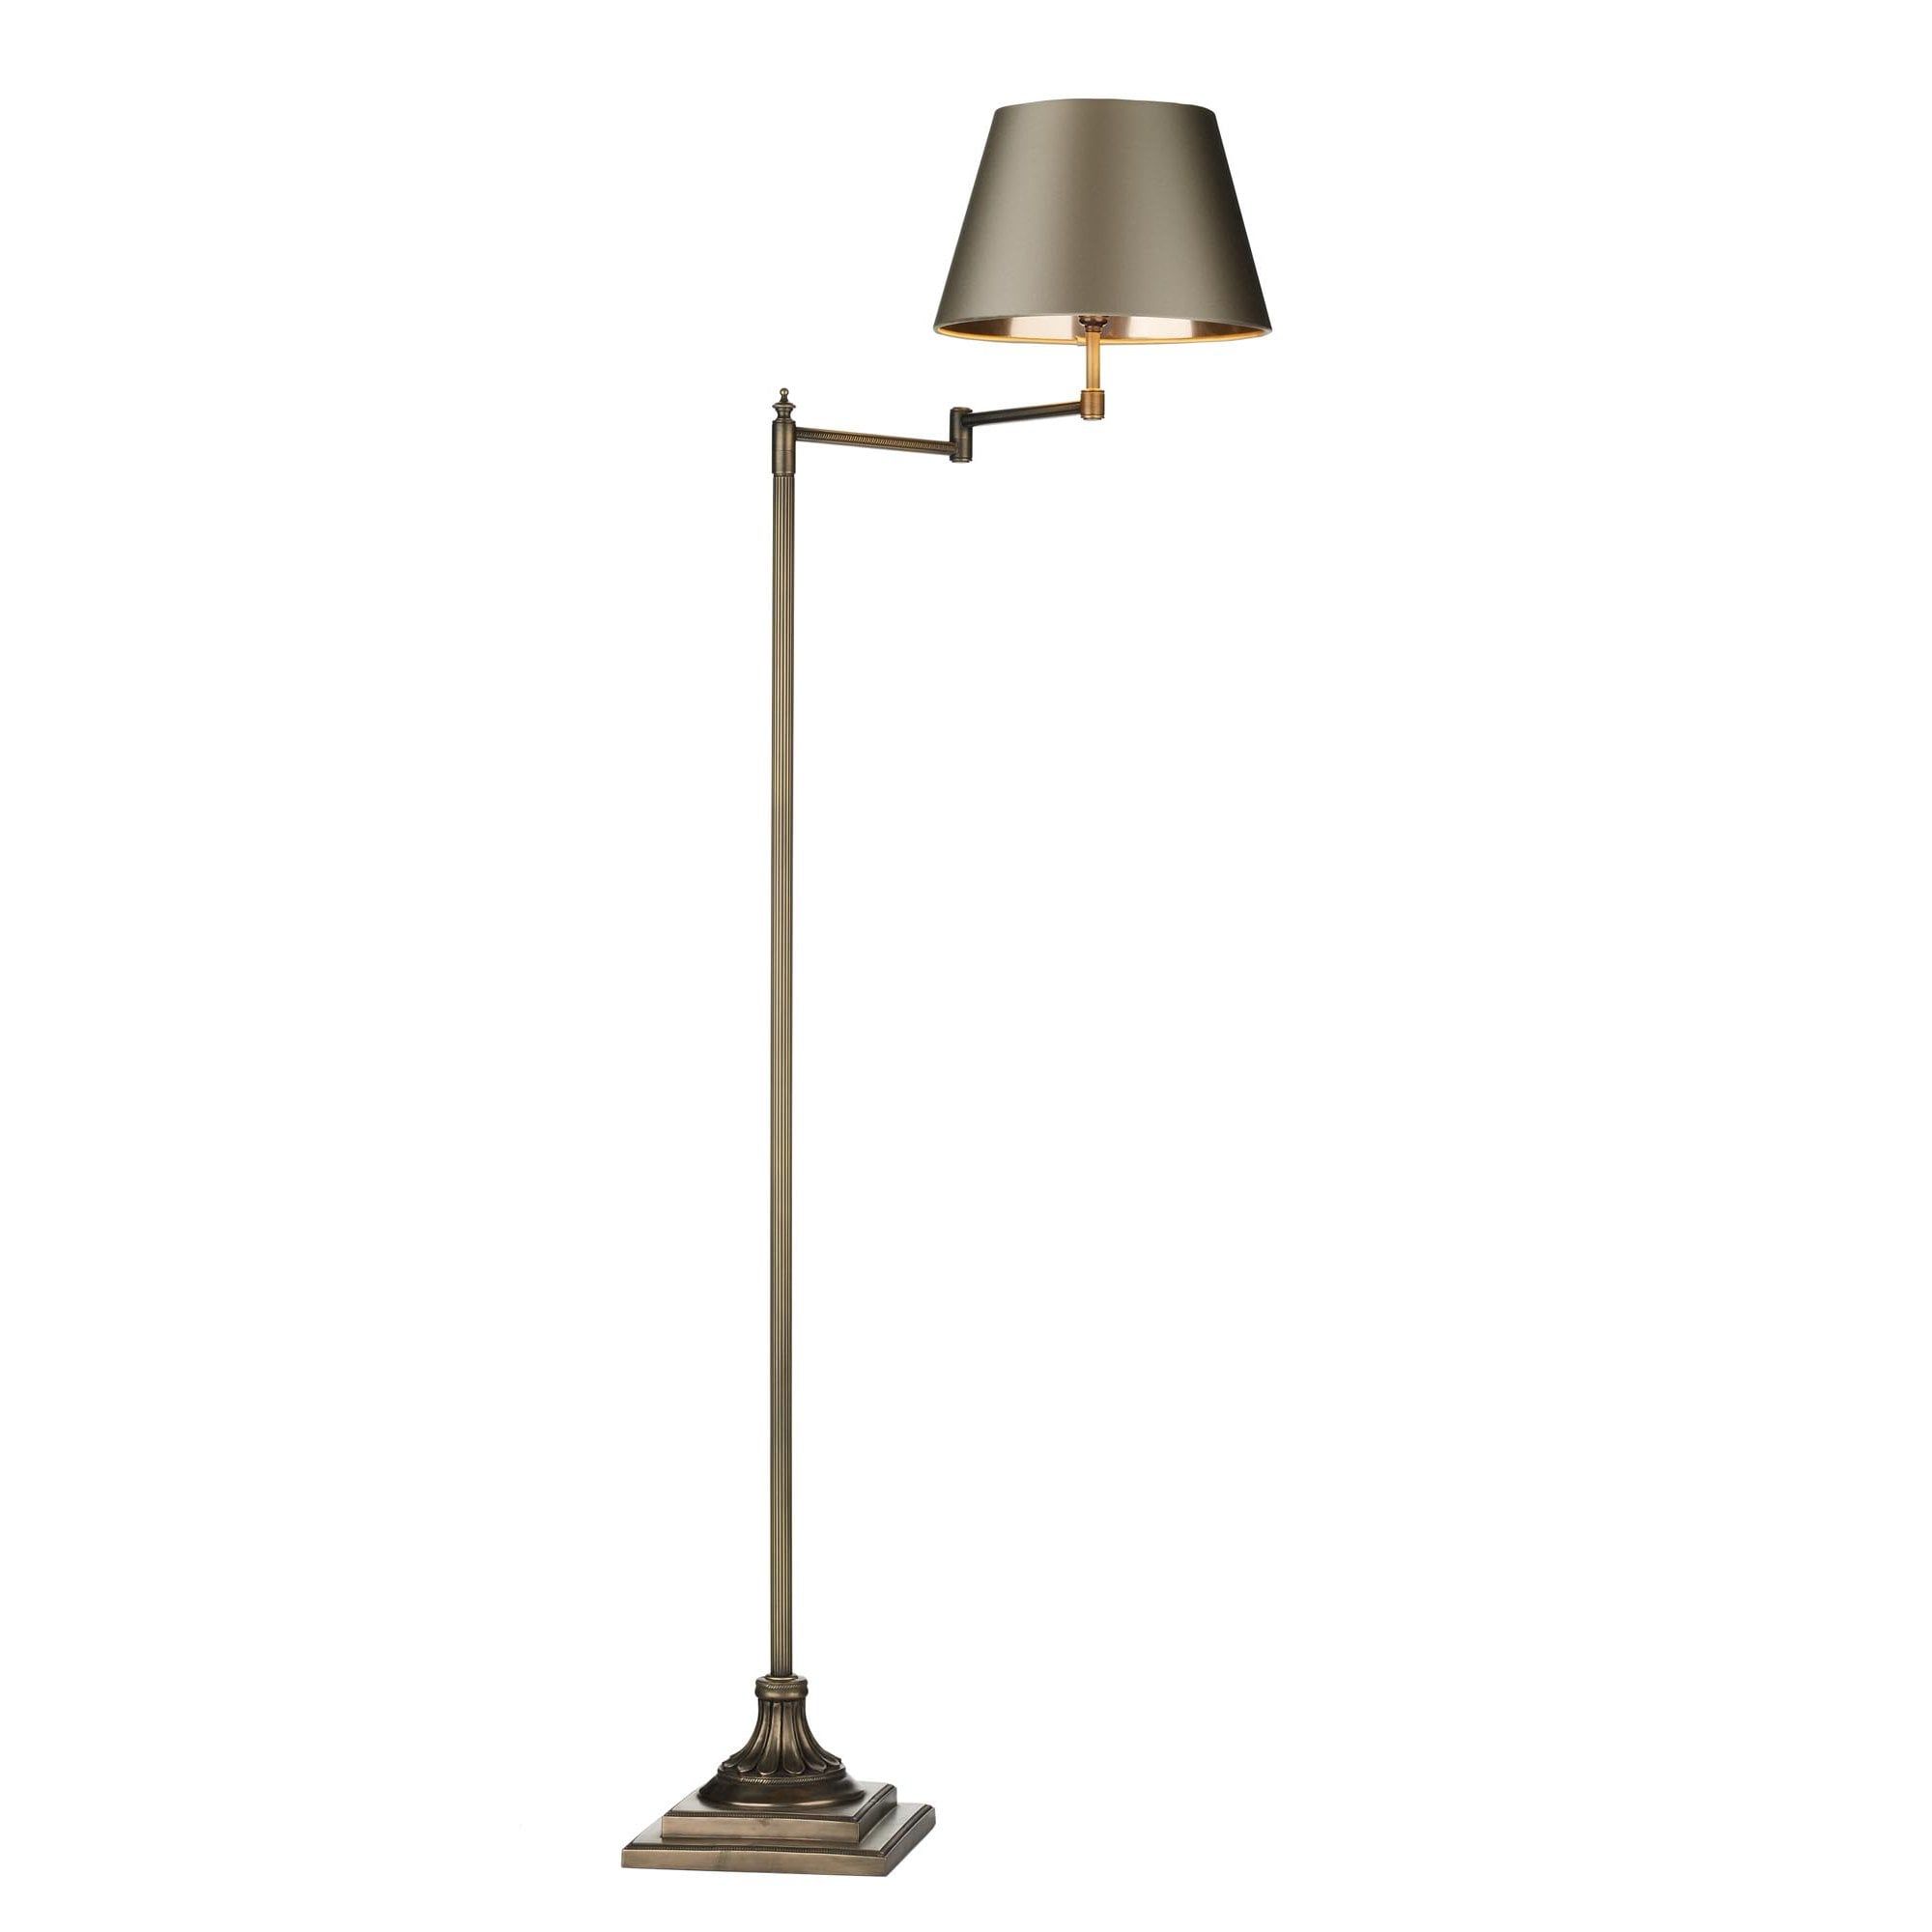 Floor Lamp Antique Brass With Swivel Arm Right Lighting And Lights Uk Inside Adjustble Arm Floor Lamps (Photo 8 of 15)